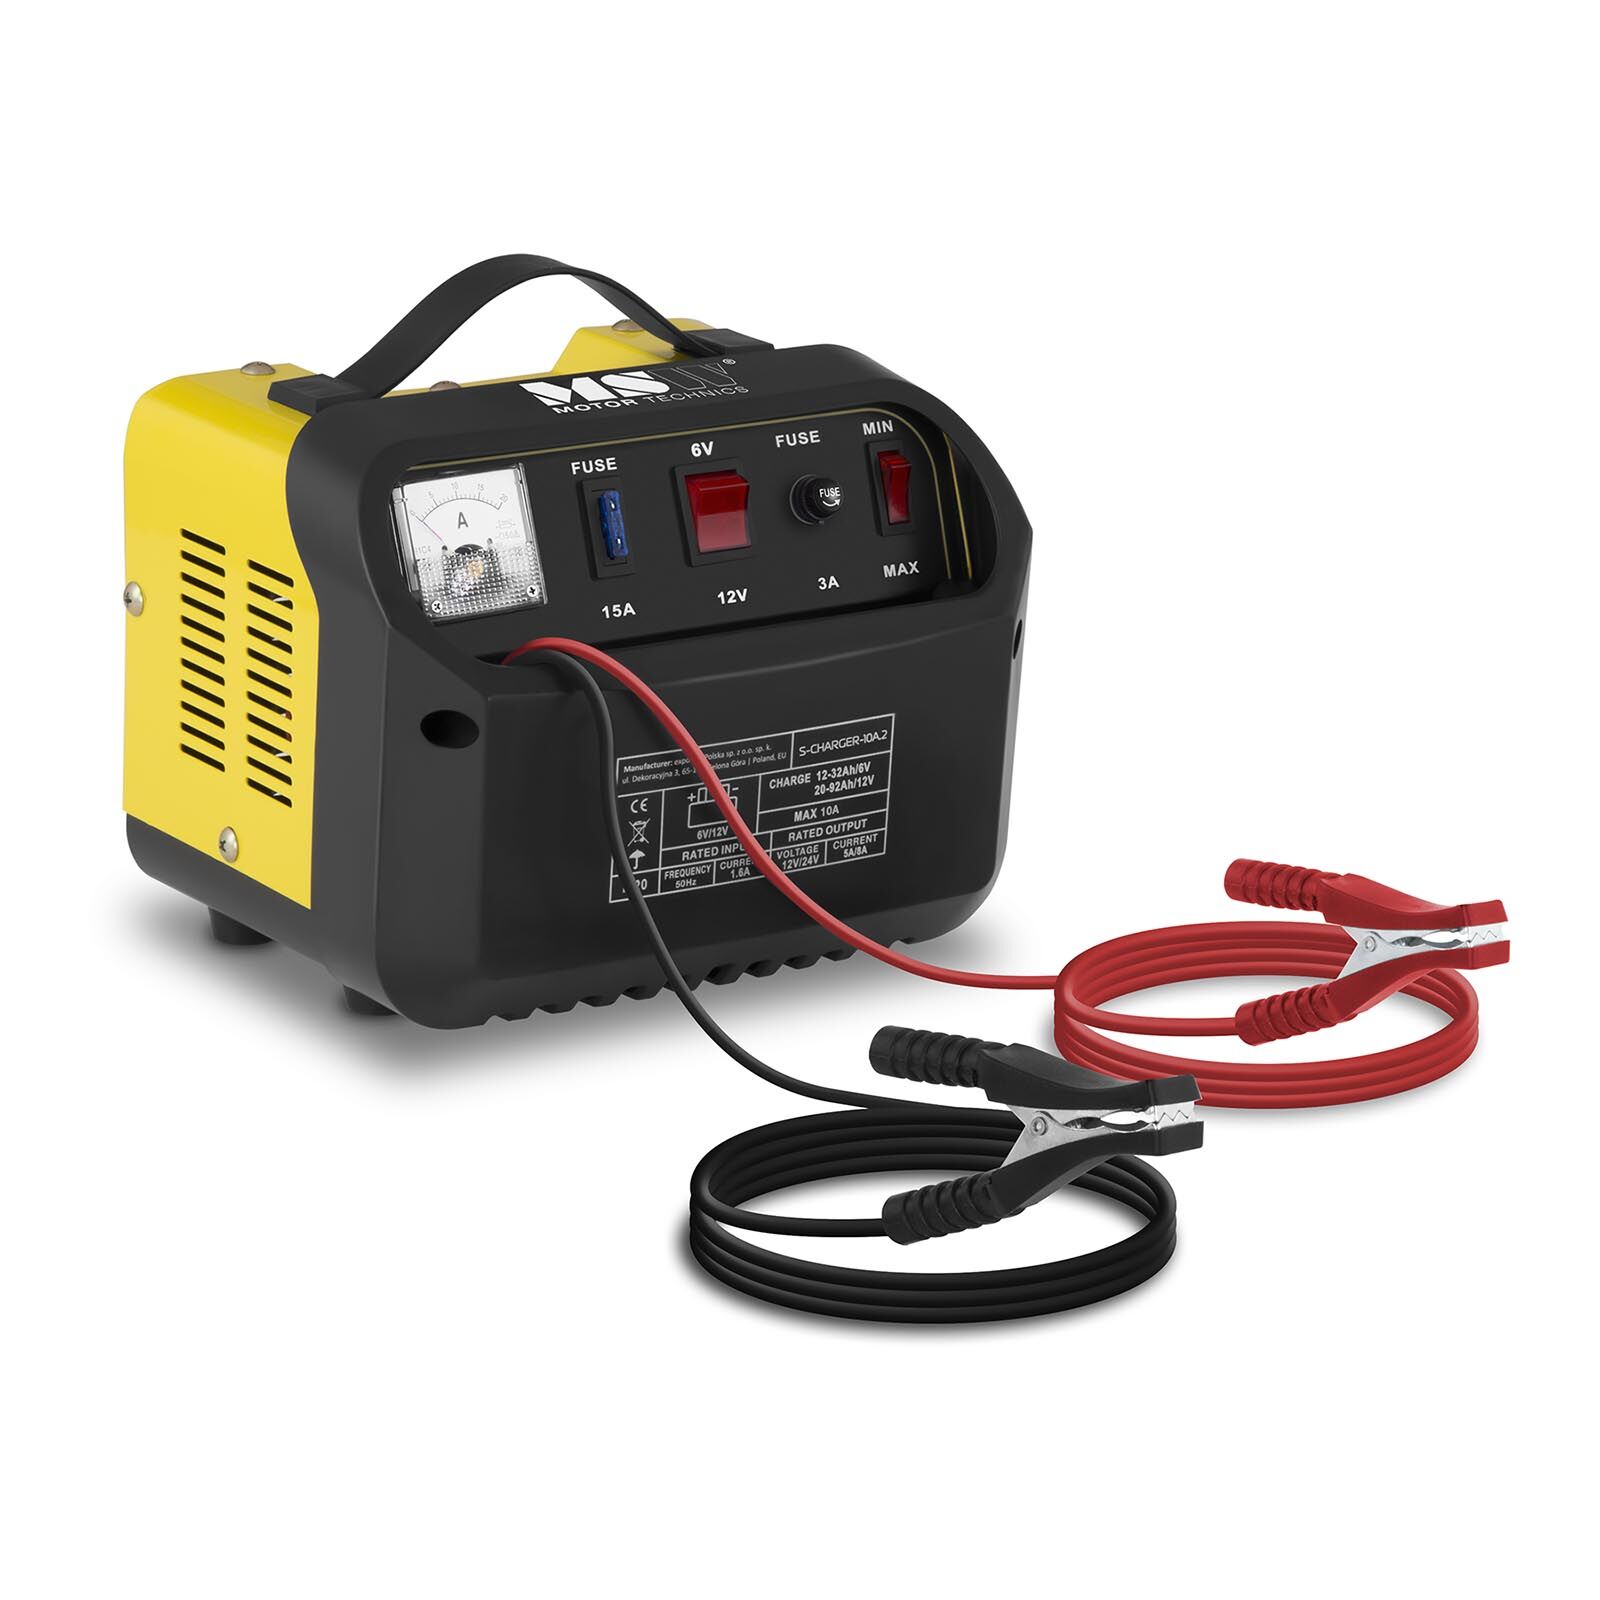 MSW Heavy Duty Battery Charger - 6/12 V - 5/8 A - Diagonal Control Panel